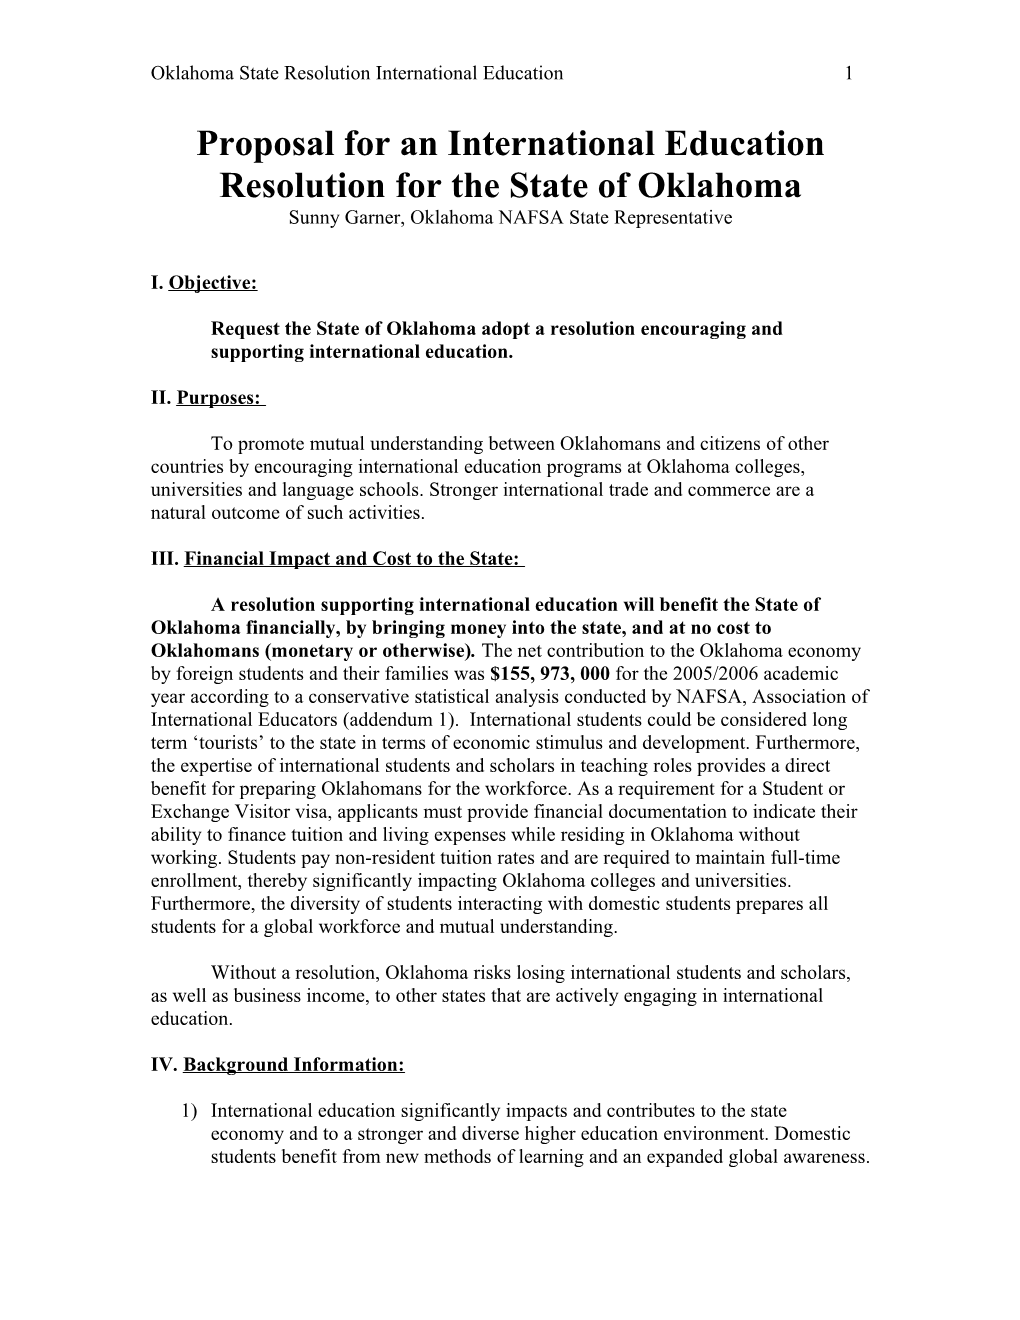 Proposal for an International Education Resolution for the State of Oklahoma